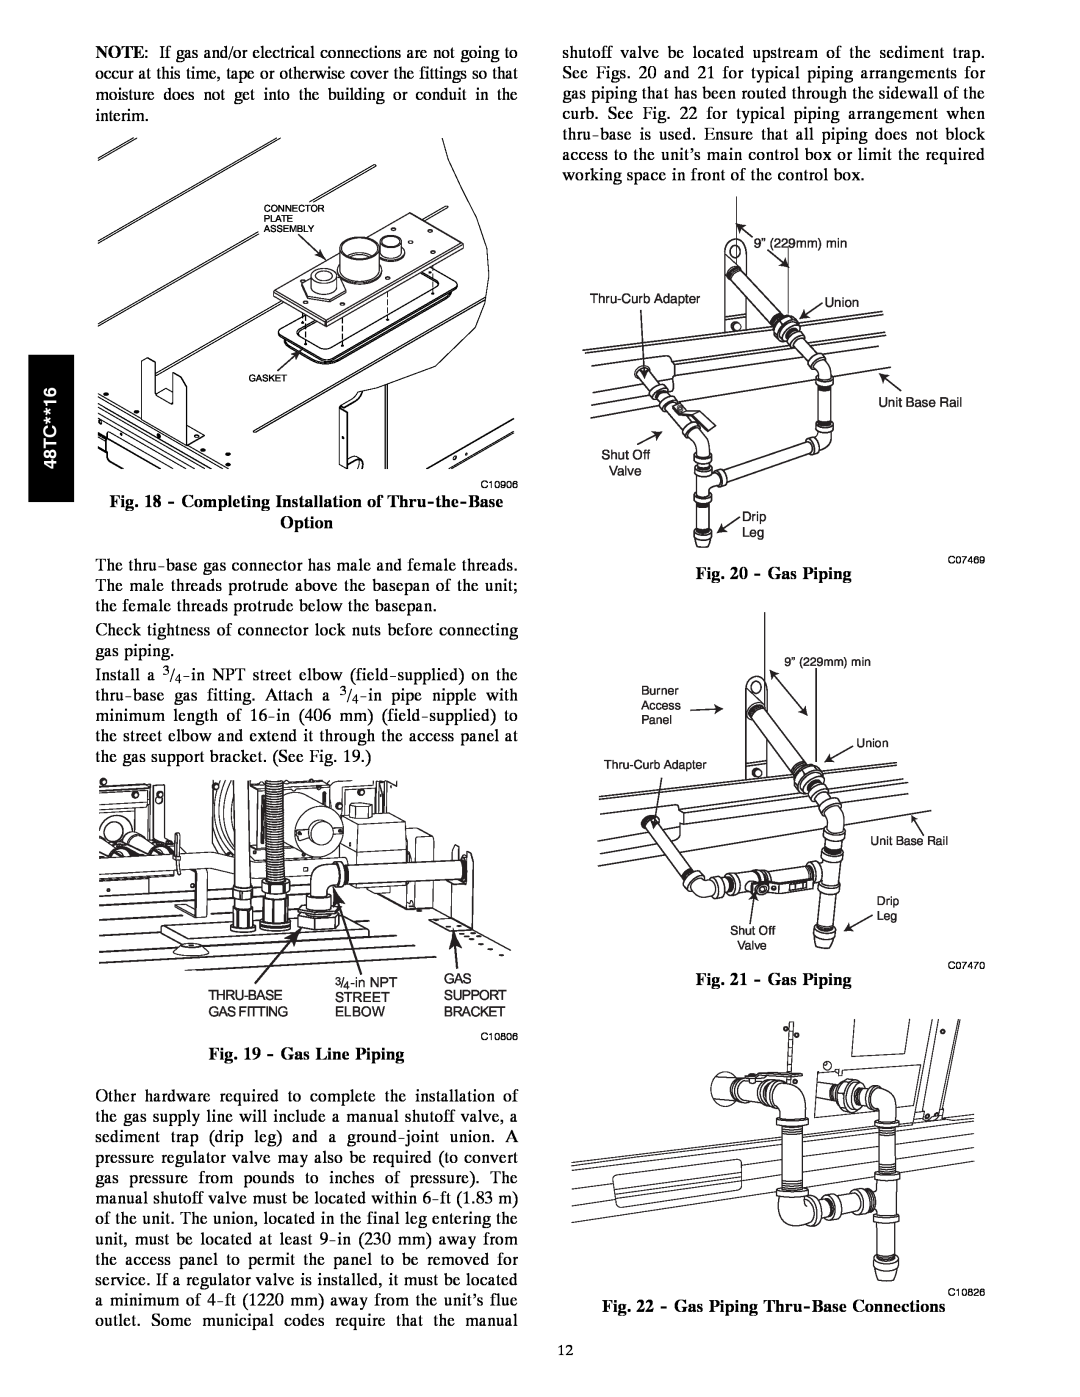 Carrier 48TC**16 installation instructions Option, Gas Line Piping, Gas Piping Thru-BaseConnections C10826 